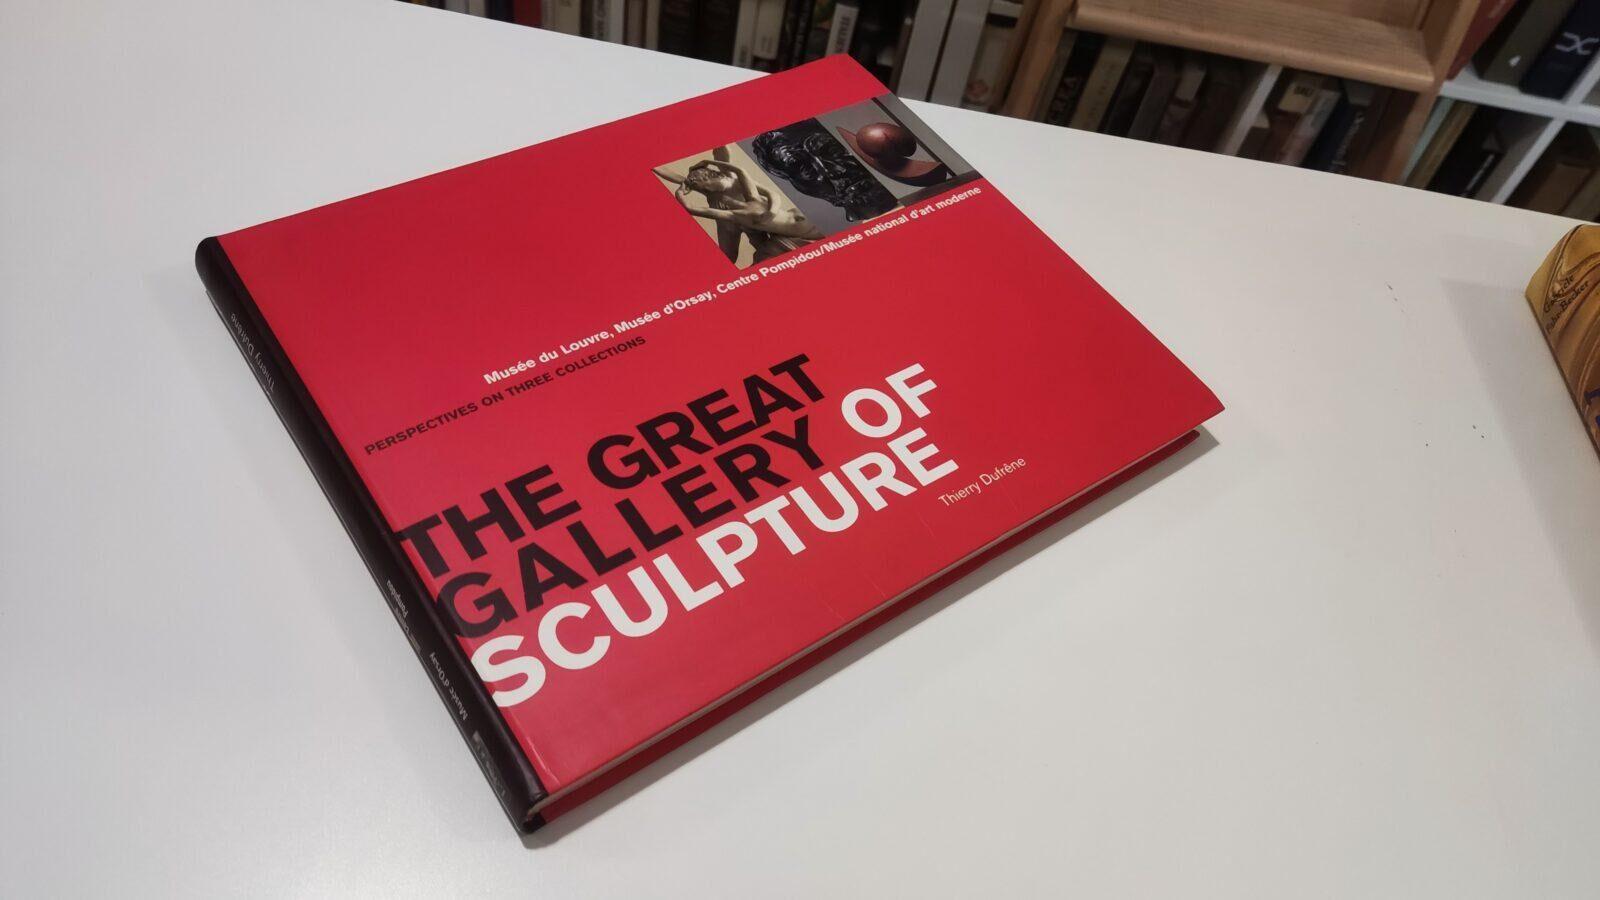 The great gallery of sculpture